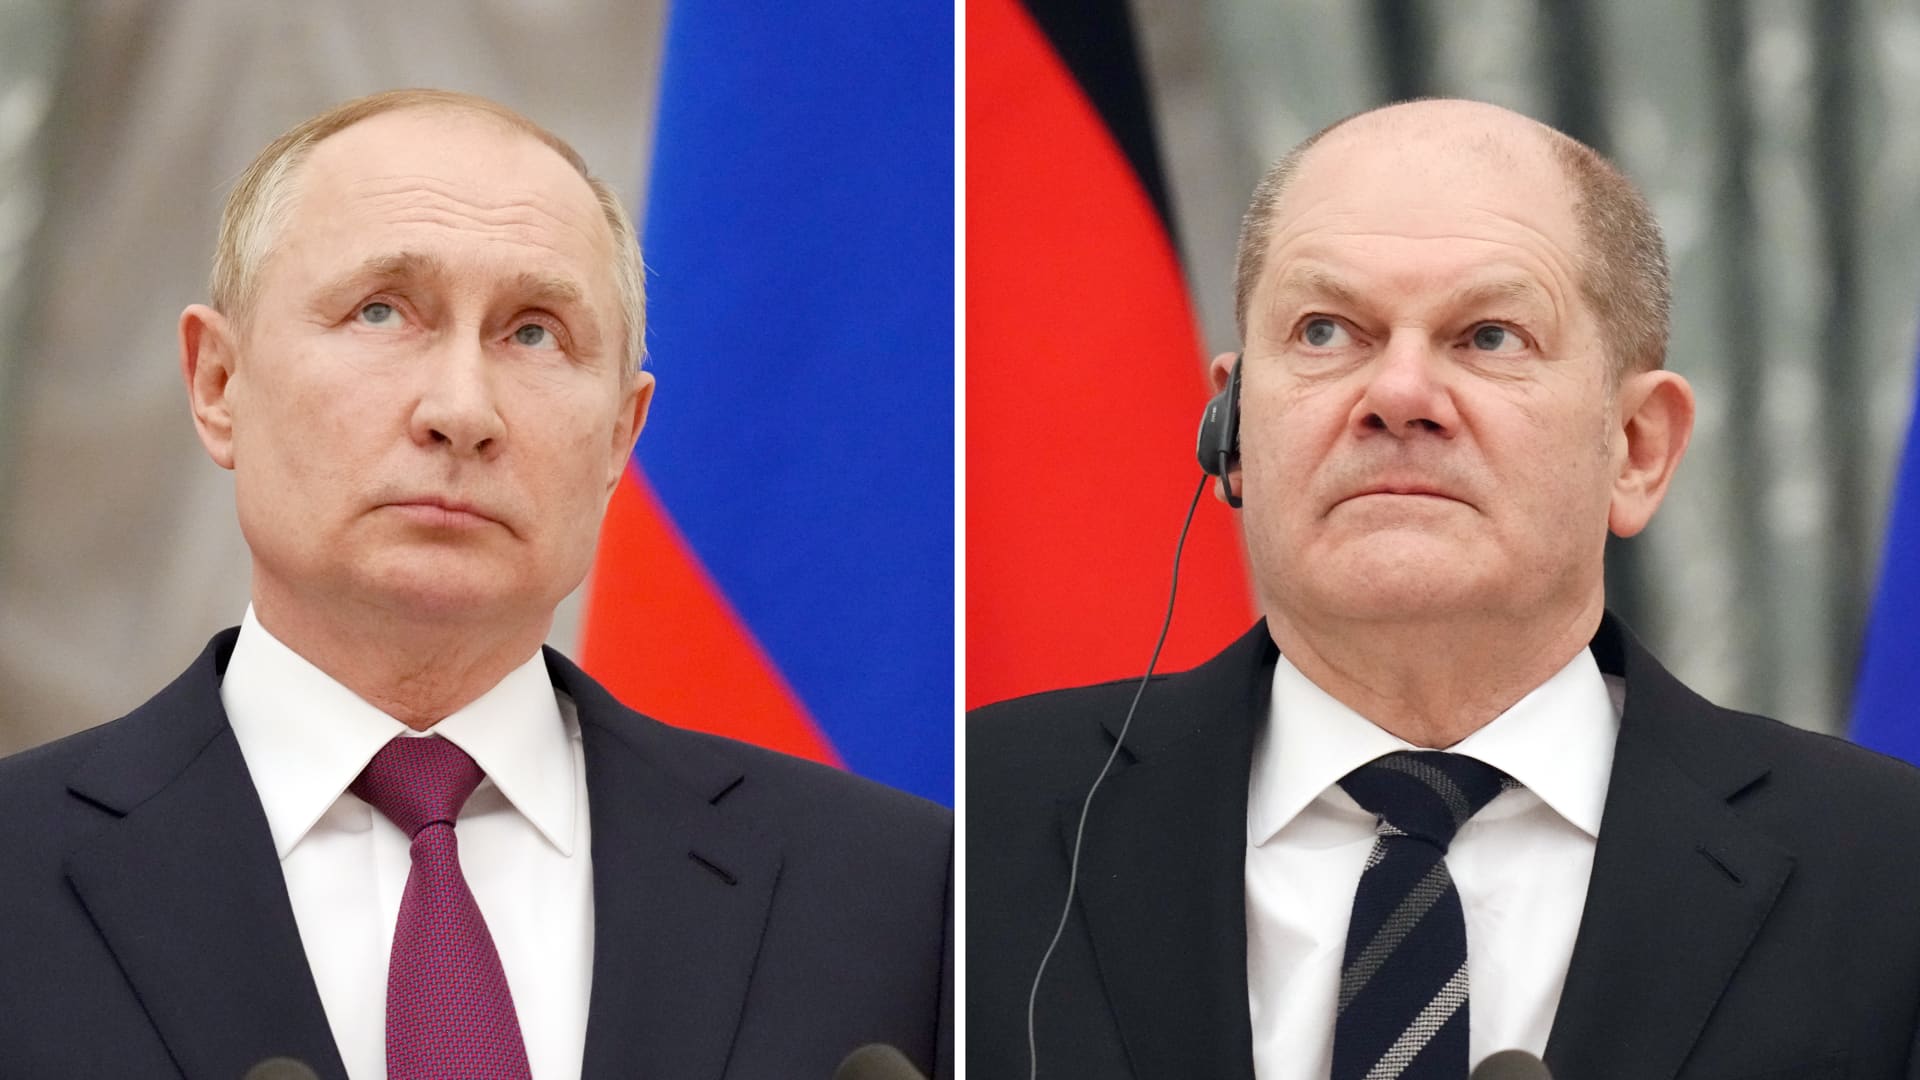 German Chancellor Olaf Scholz (SPD, r) and Russian President Vladimir Putin look up after several hours of one-on-one talks at a joint press conference. Scholz met the Russian president for talks on the situation on the Ukrainian-Russian border.